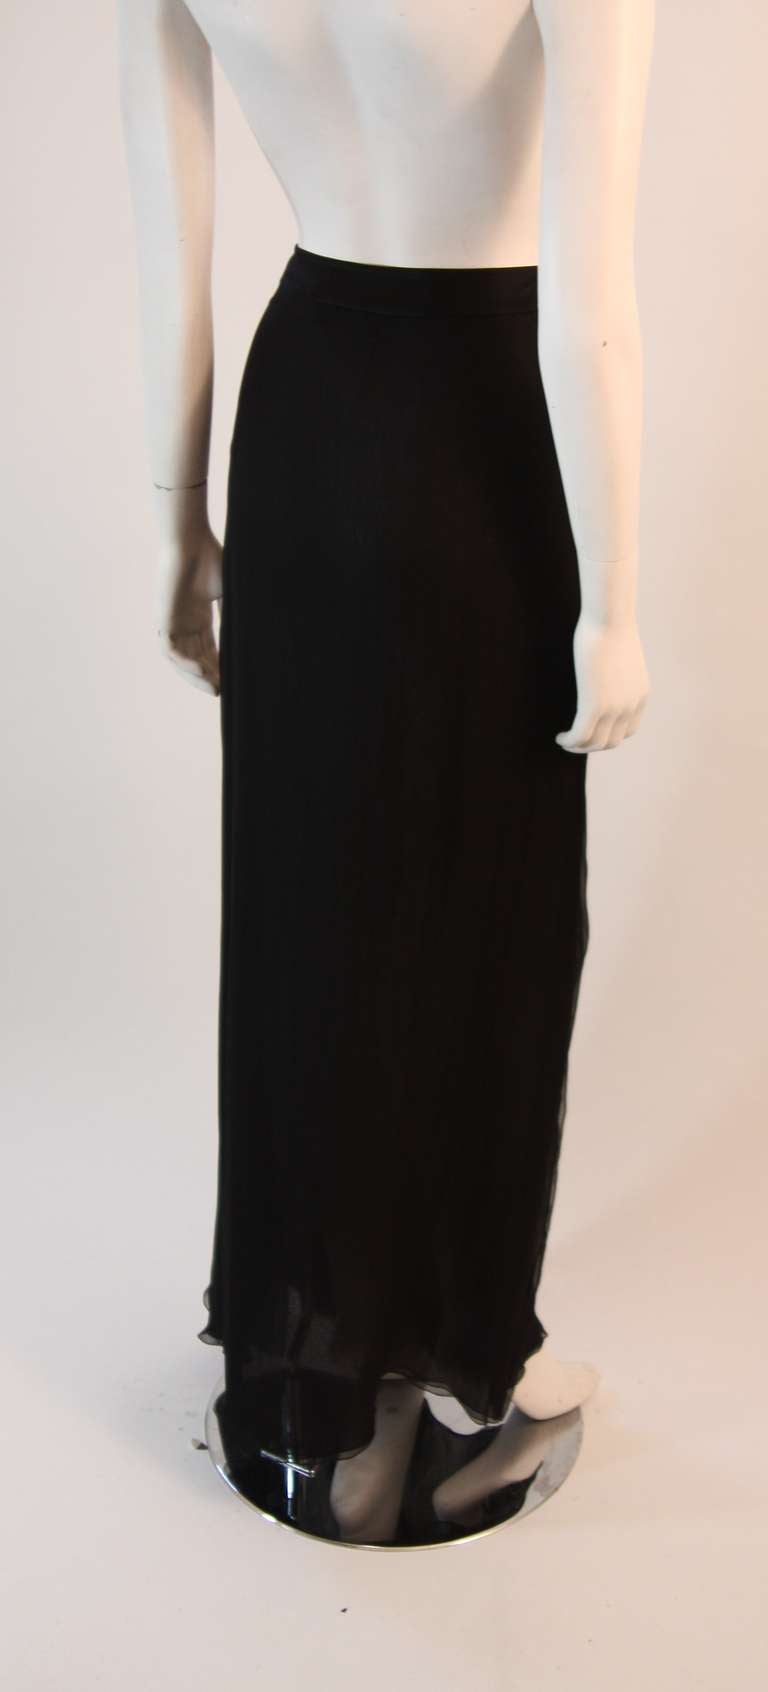 Women's Exquisite Valentino Chiffon Skirt with Pearl Belt Size 10 For Sale